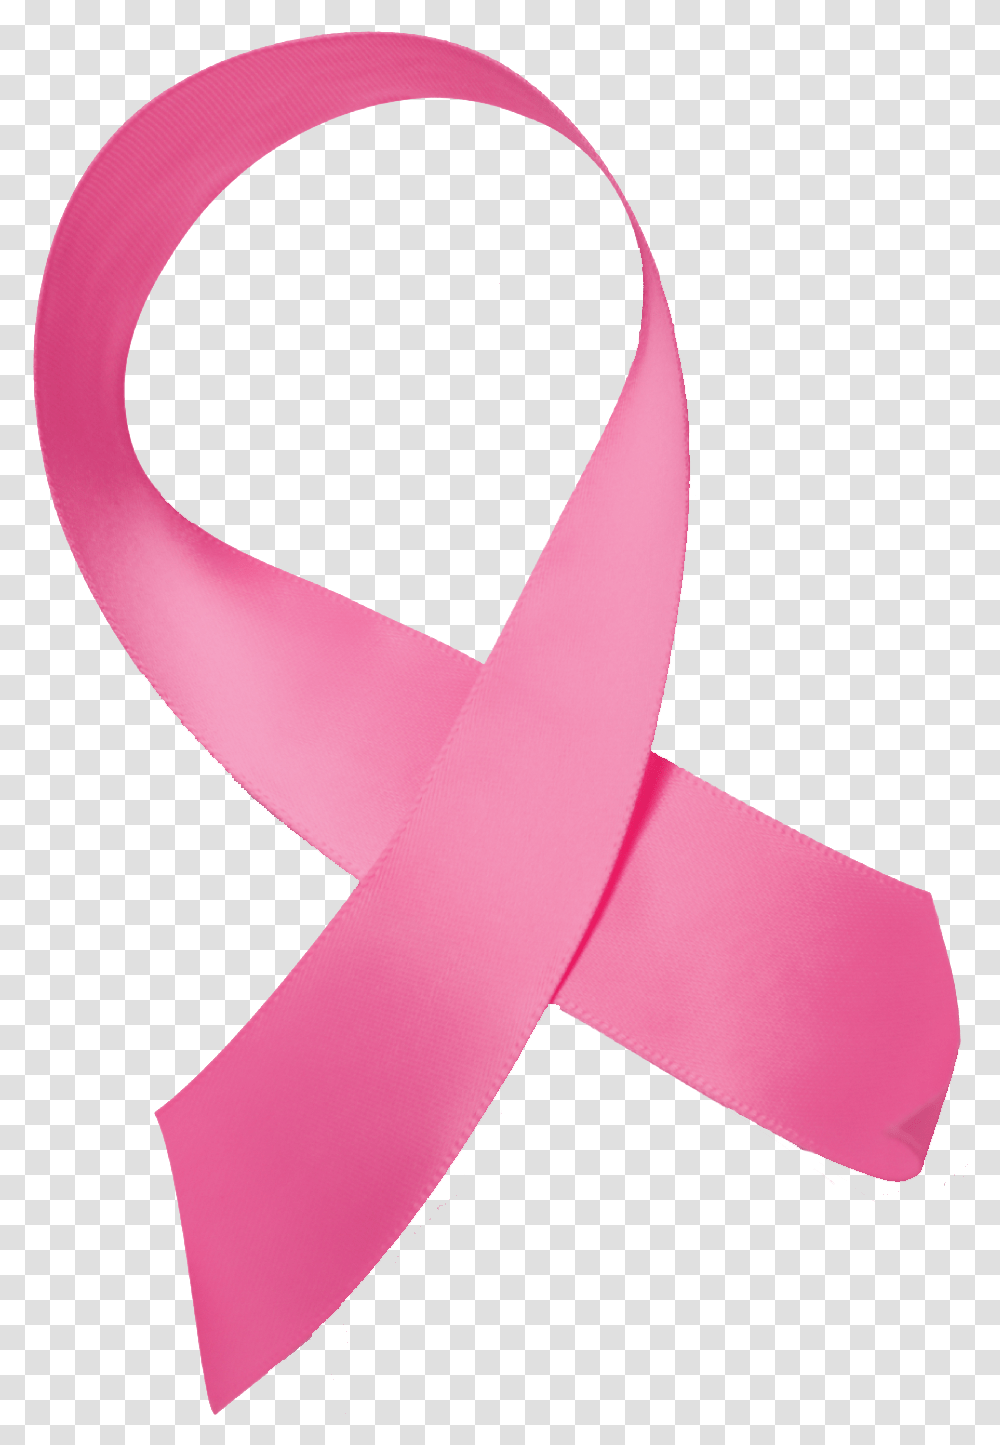 Logo Cancer 8 Image Breast Cancer Awareness Ribbon, Tie, Accessories, Accessory, Purple Transparent Png